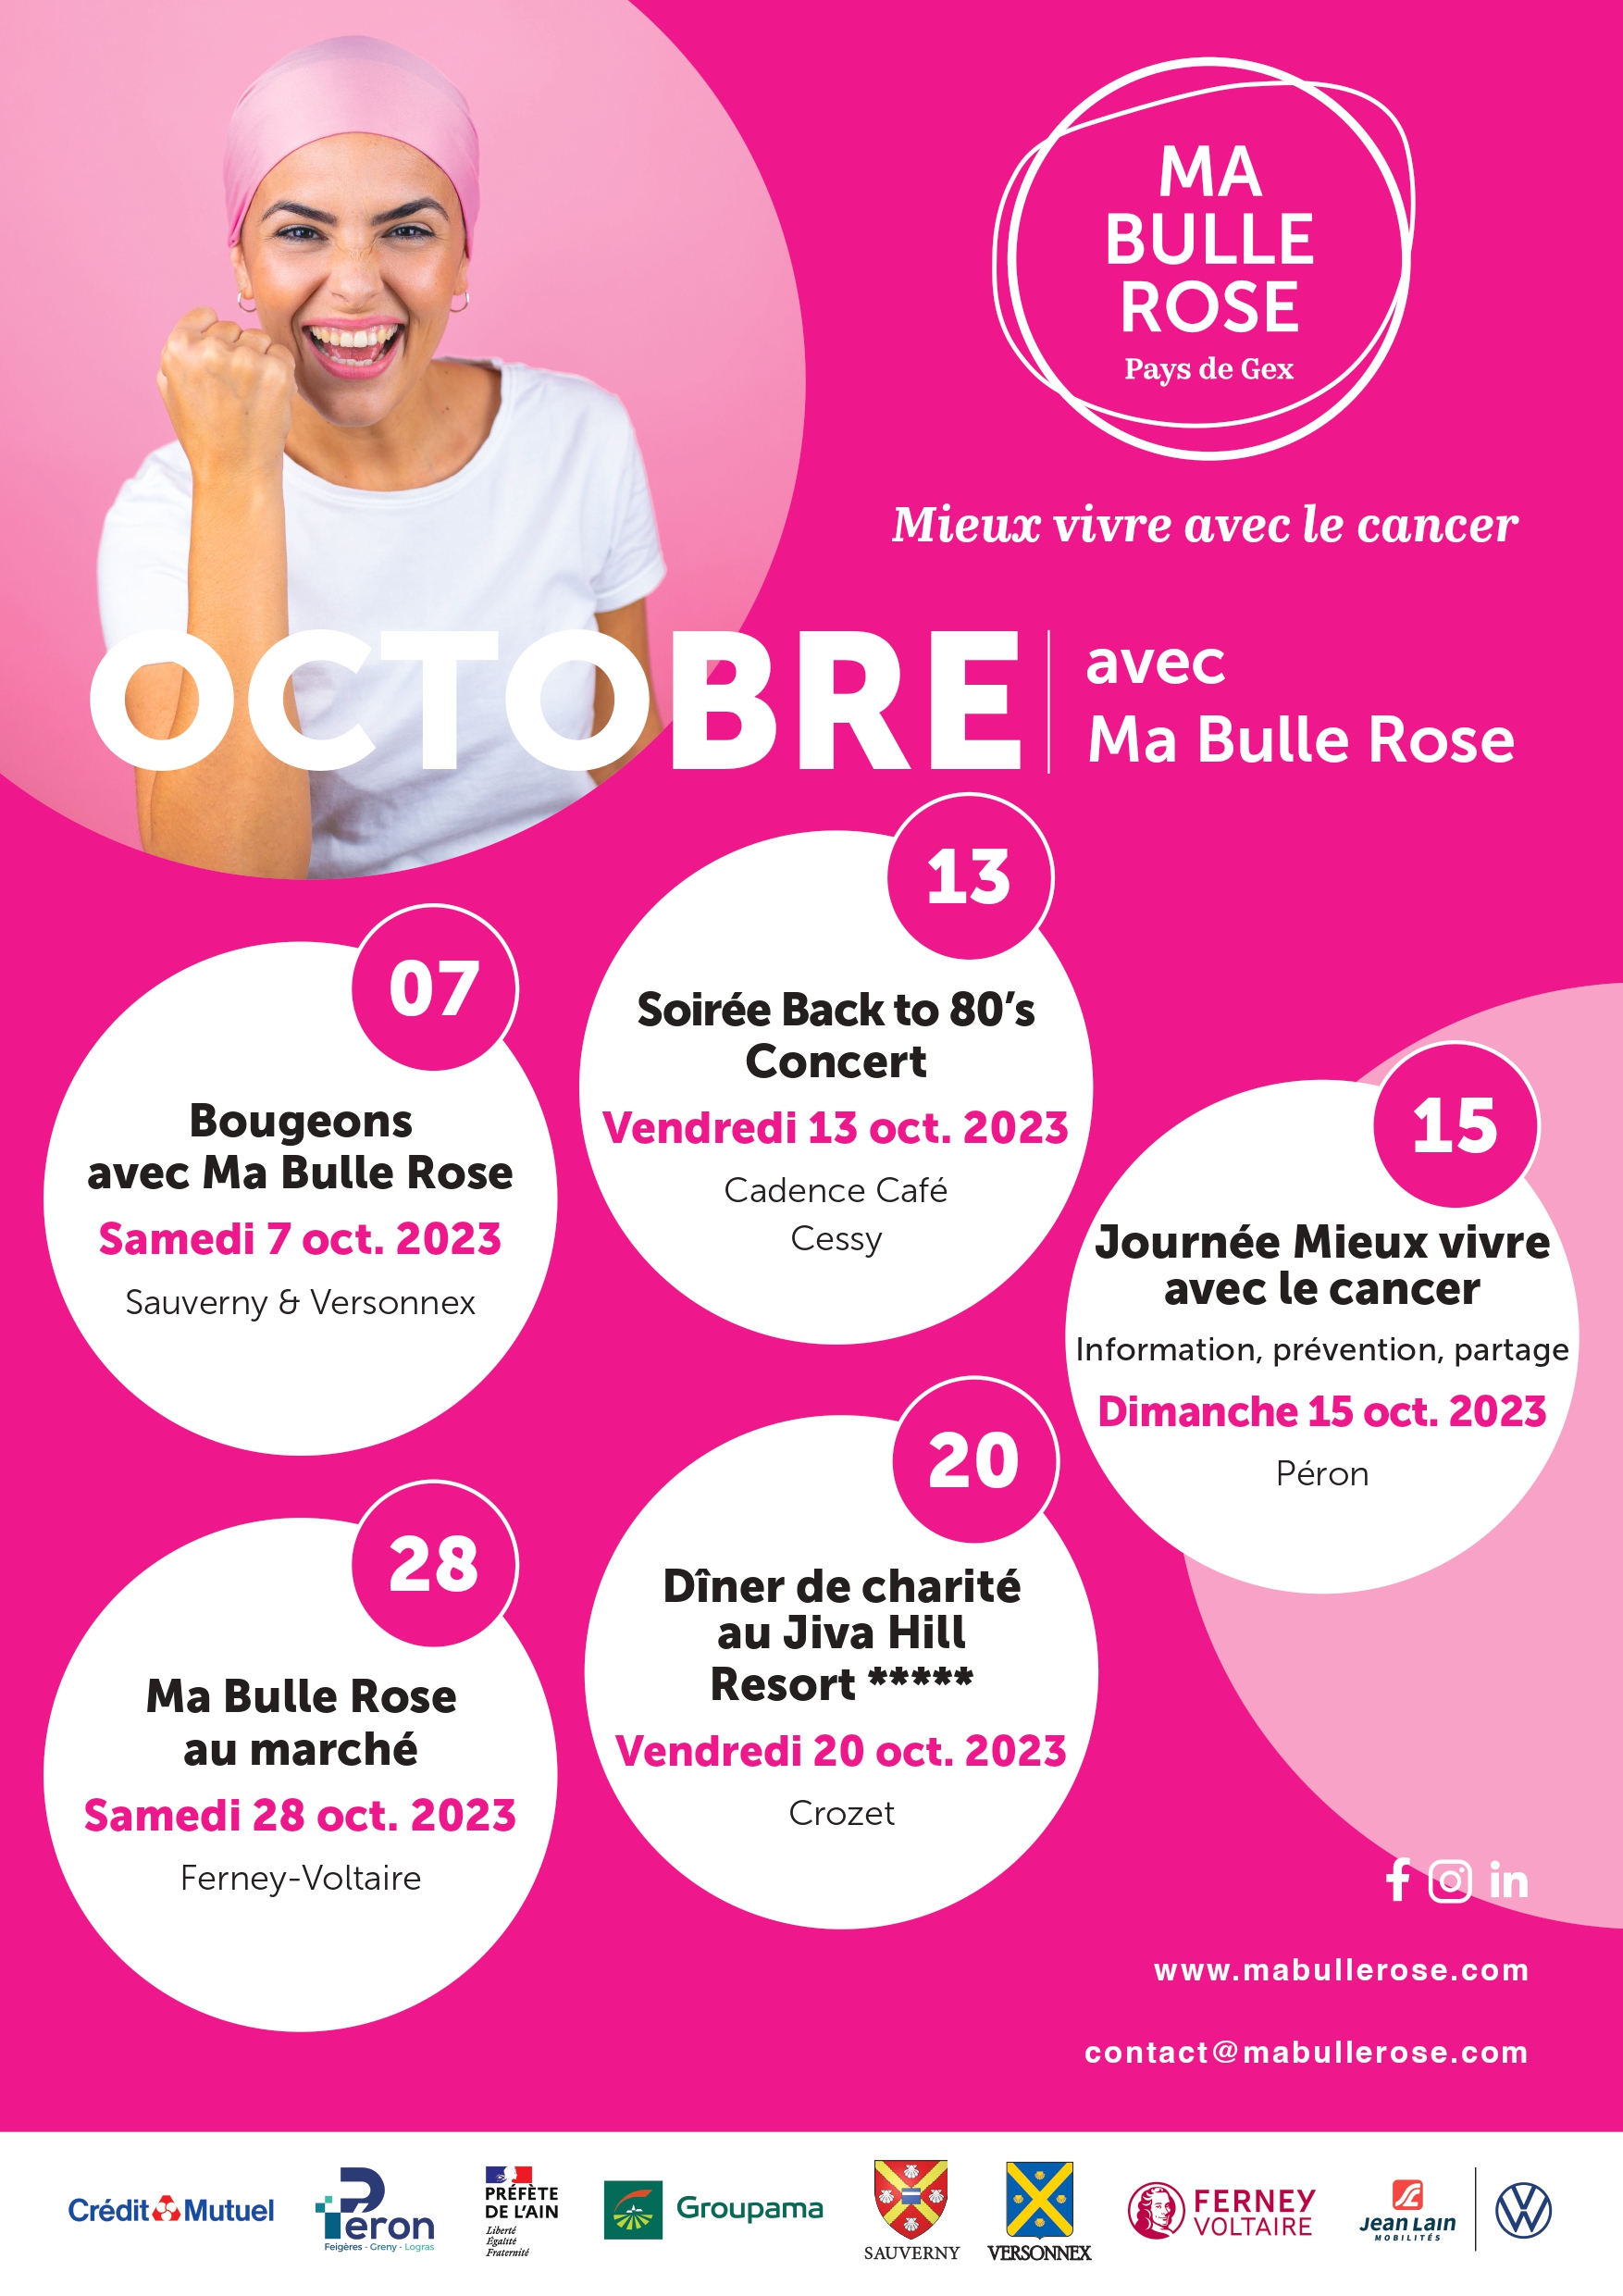 You are currently viewing Octobre Rose avec ma Bulle Rose, à vos agenda